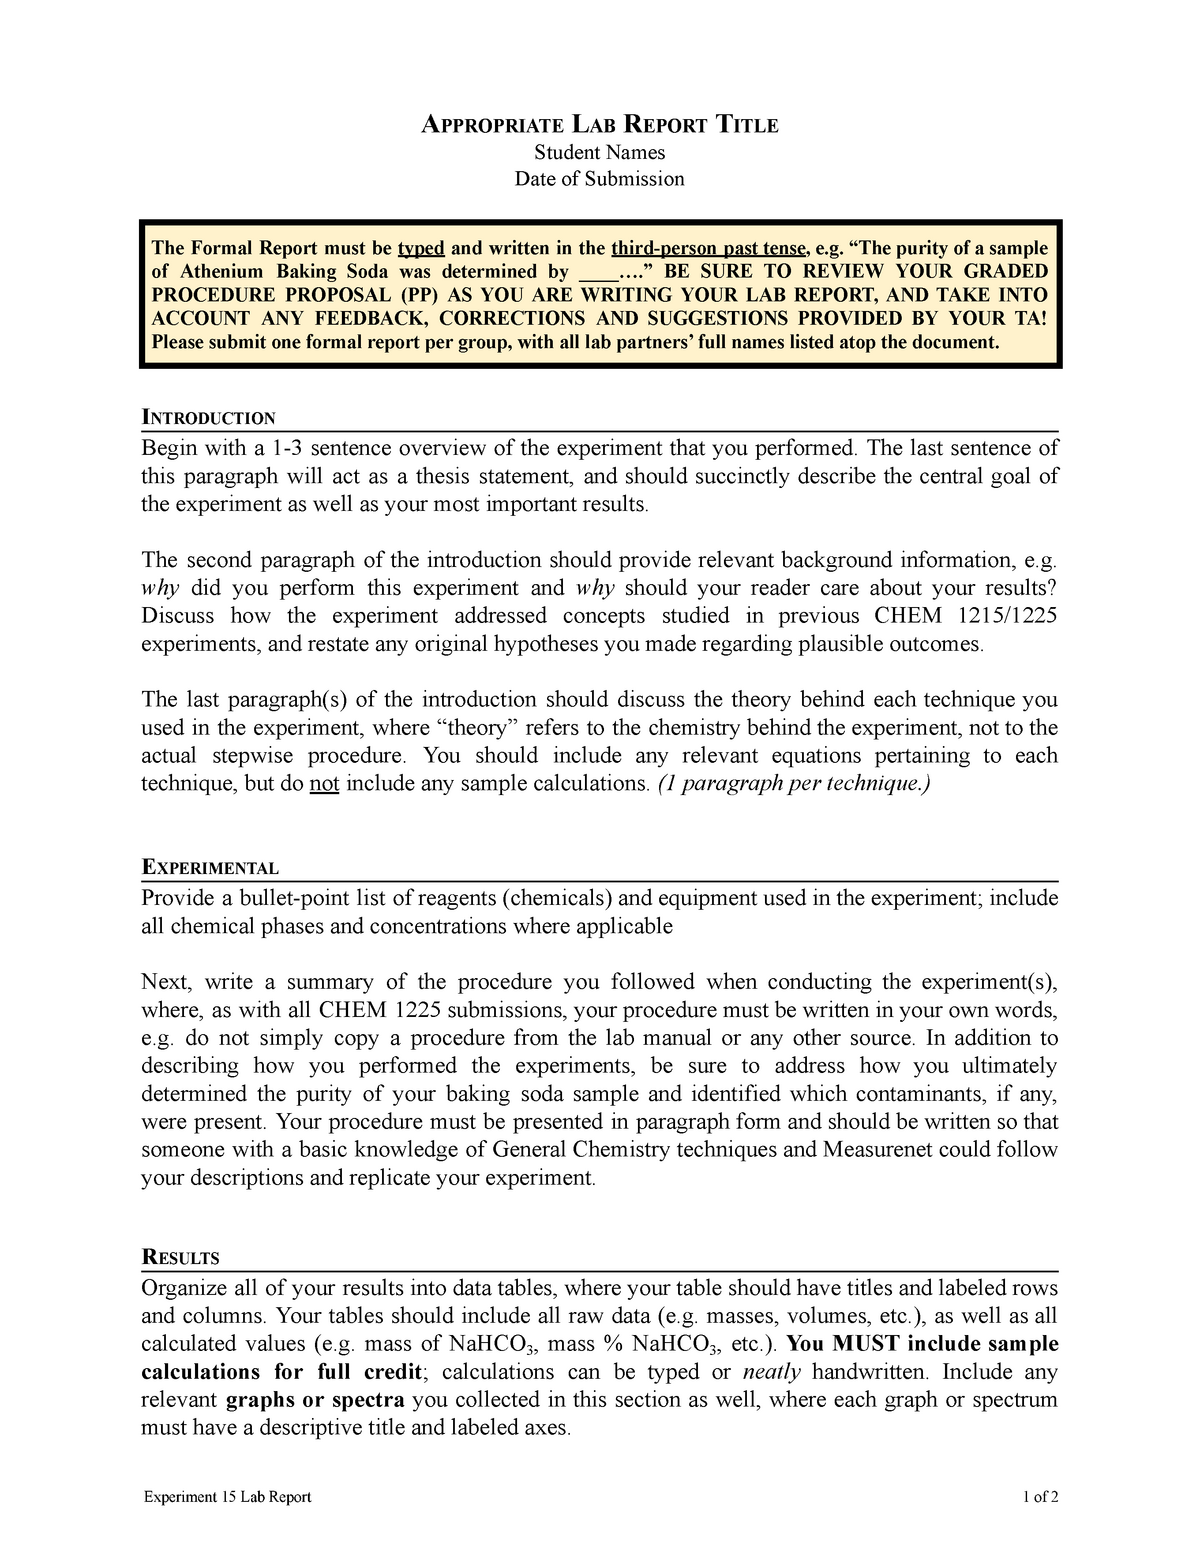 15 Formal Report Template APPROPRIATELABREPORTTITLE Student Names Date Of Submission The